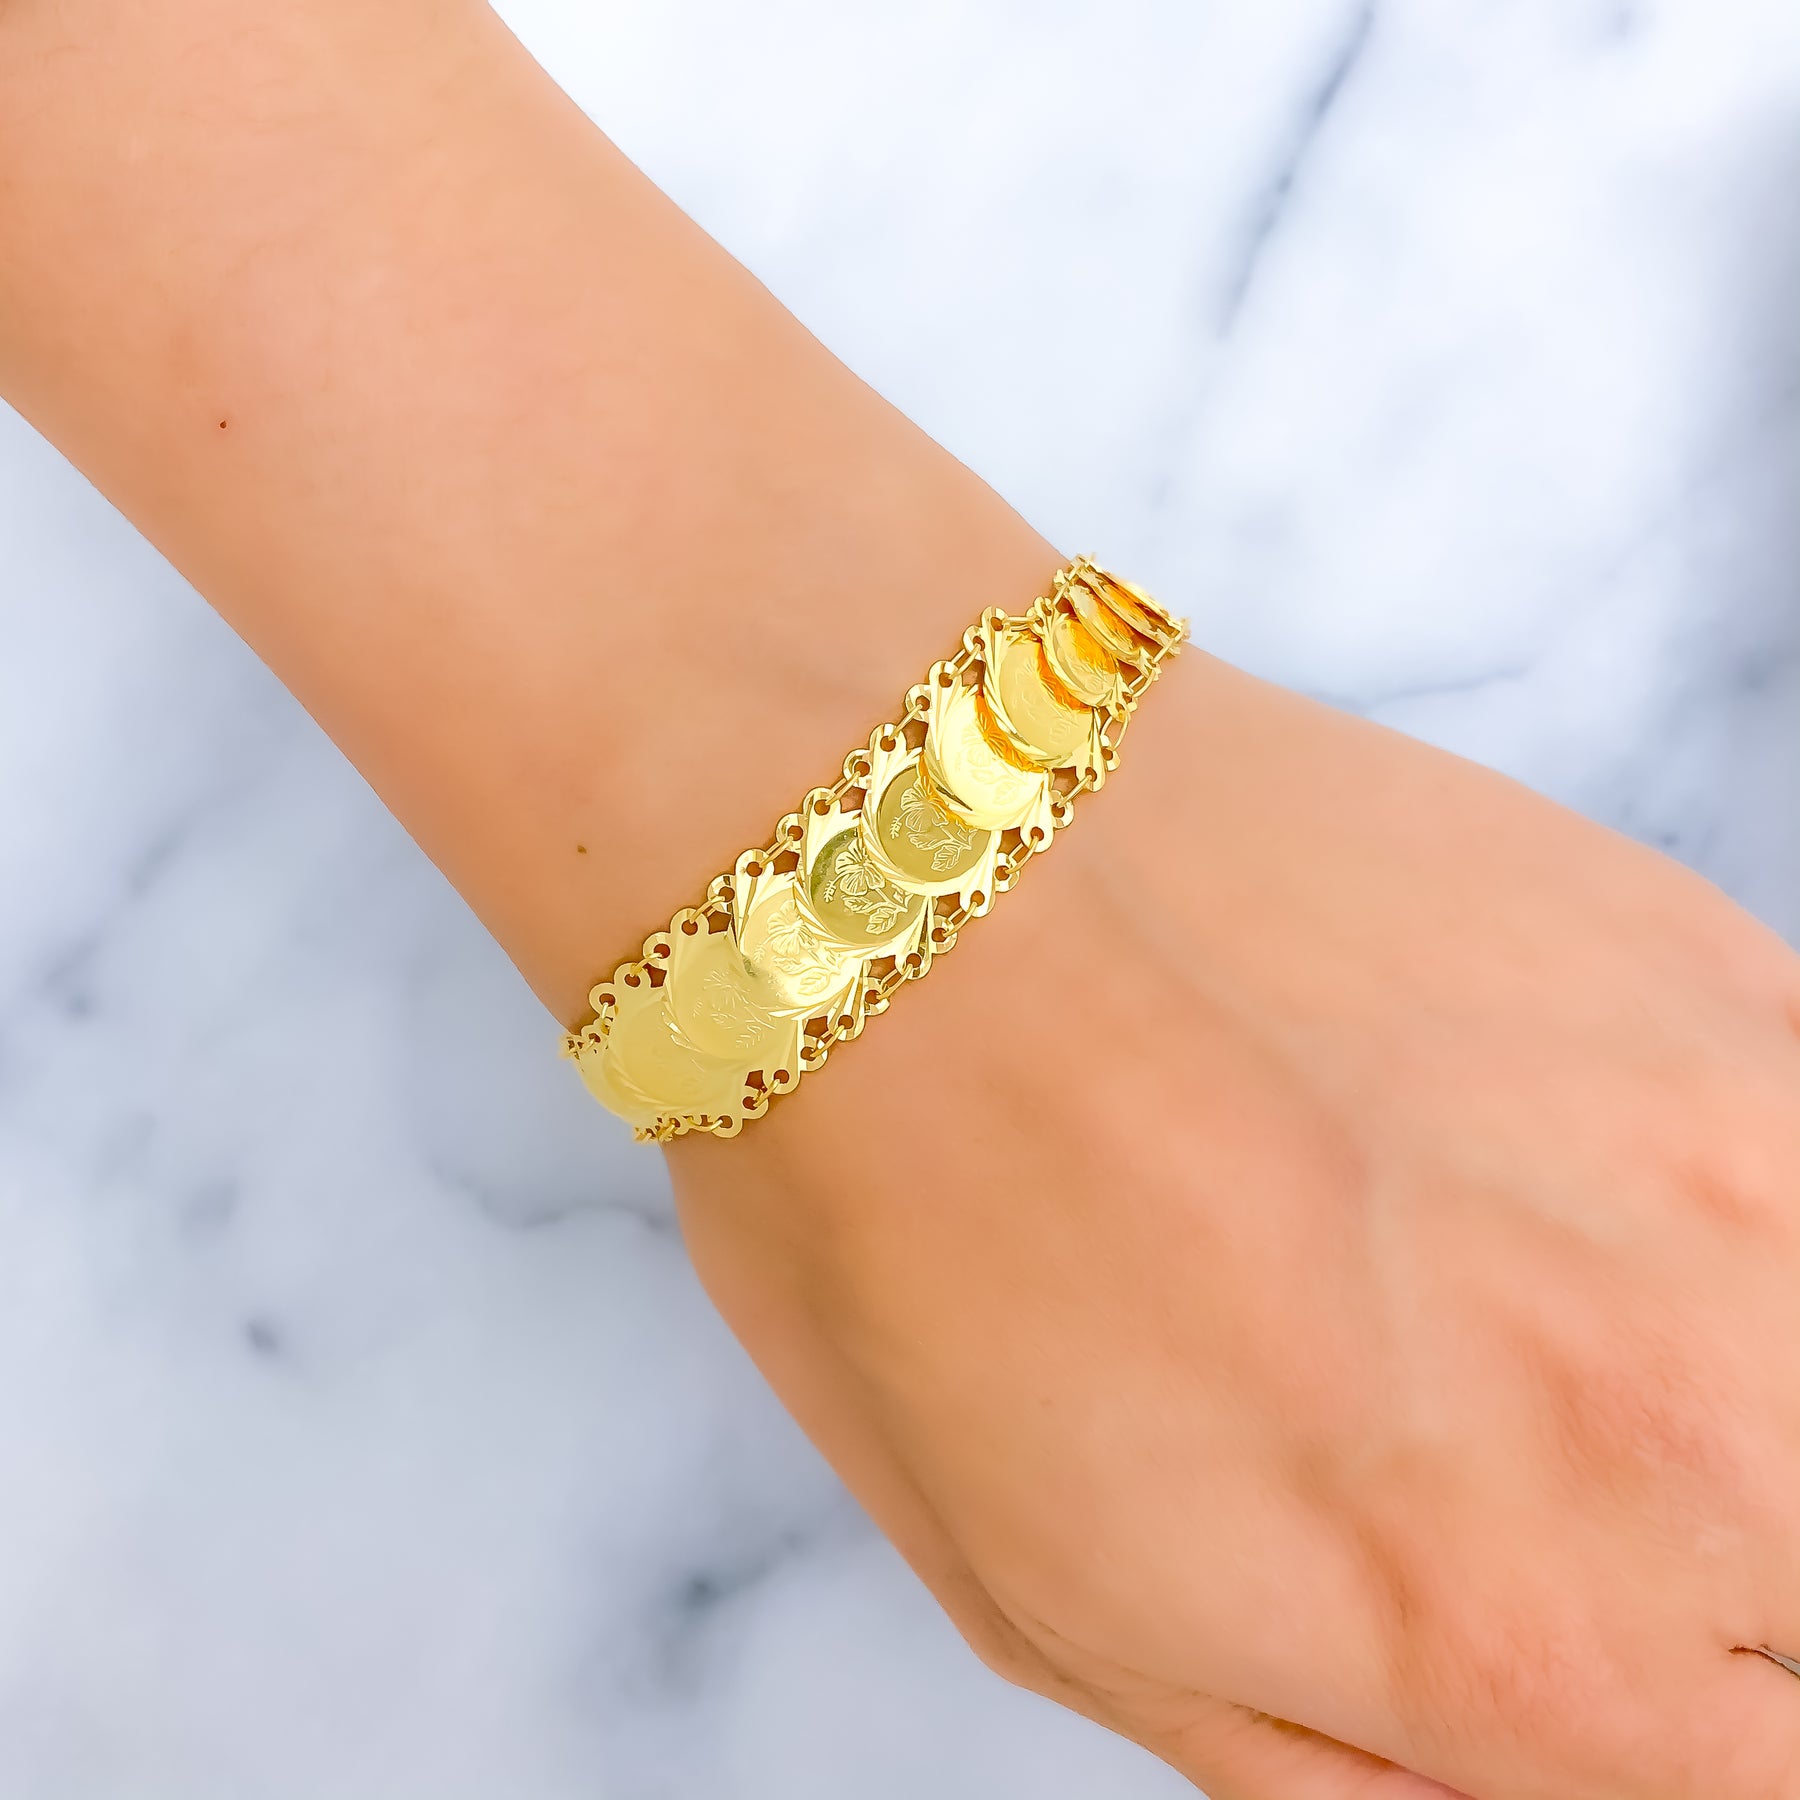 Sold to CS] Rare find — a valuable gold coin bracelet in 21K. A unique  piece for the sophisticated type. ✨ 21K 15.2G Coin Bracelet ✨… | Instagram